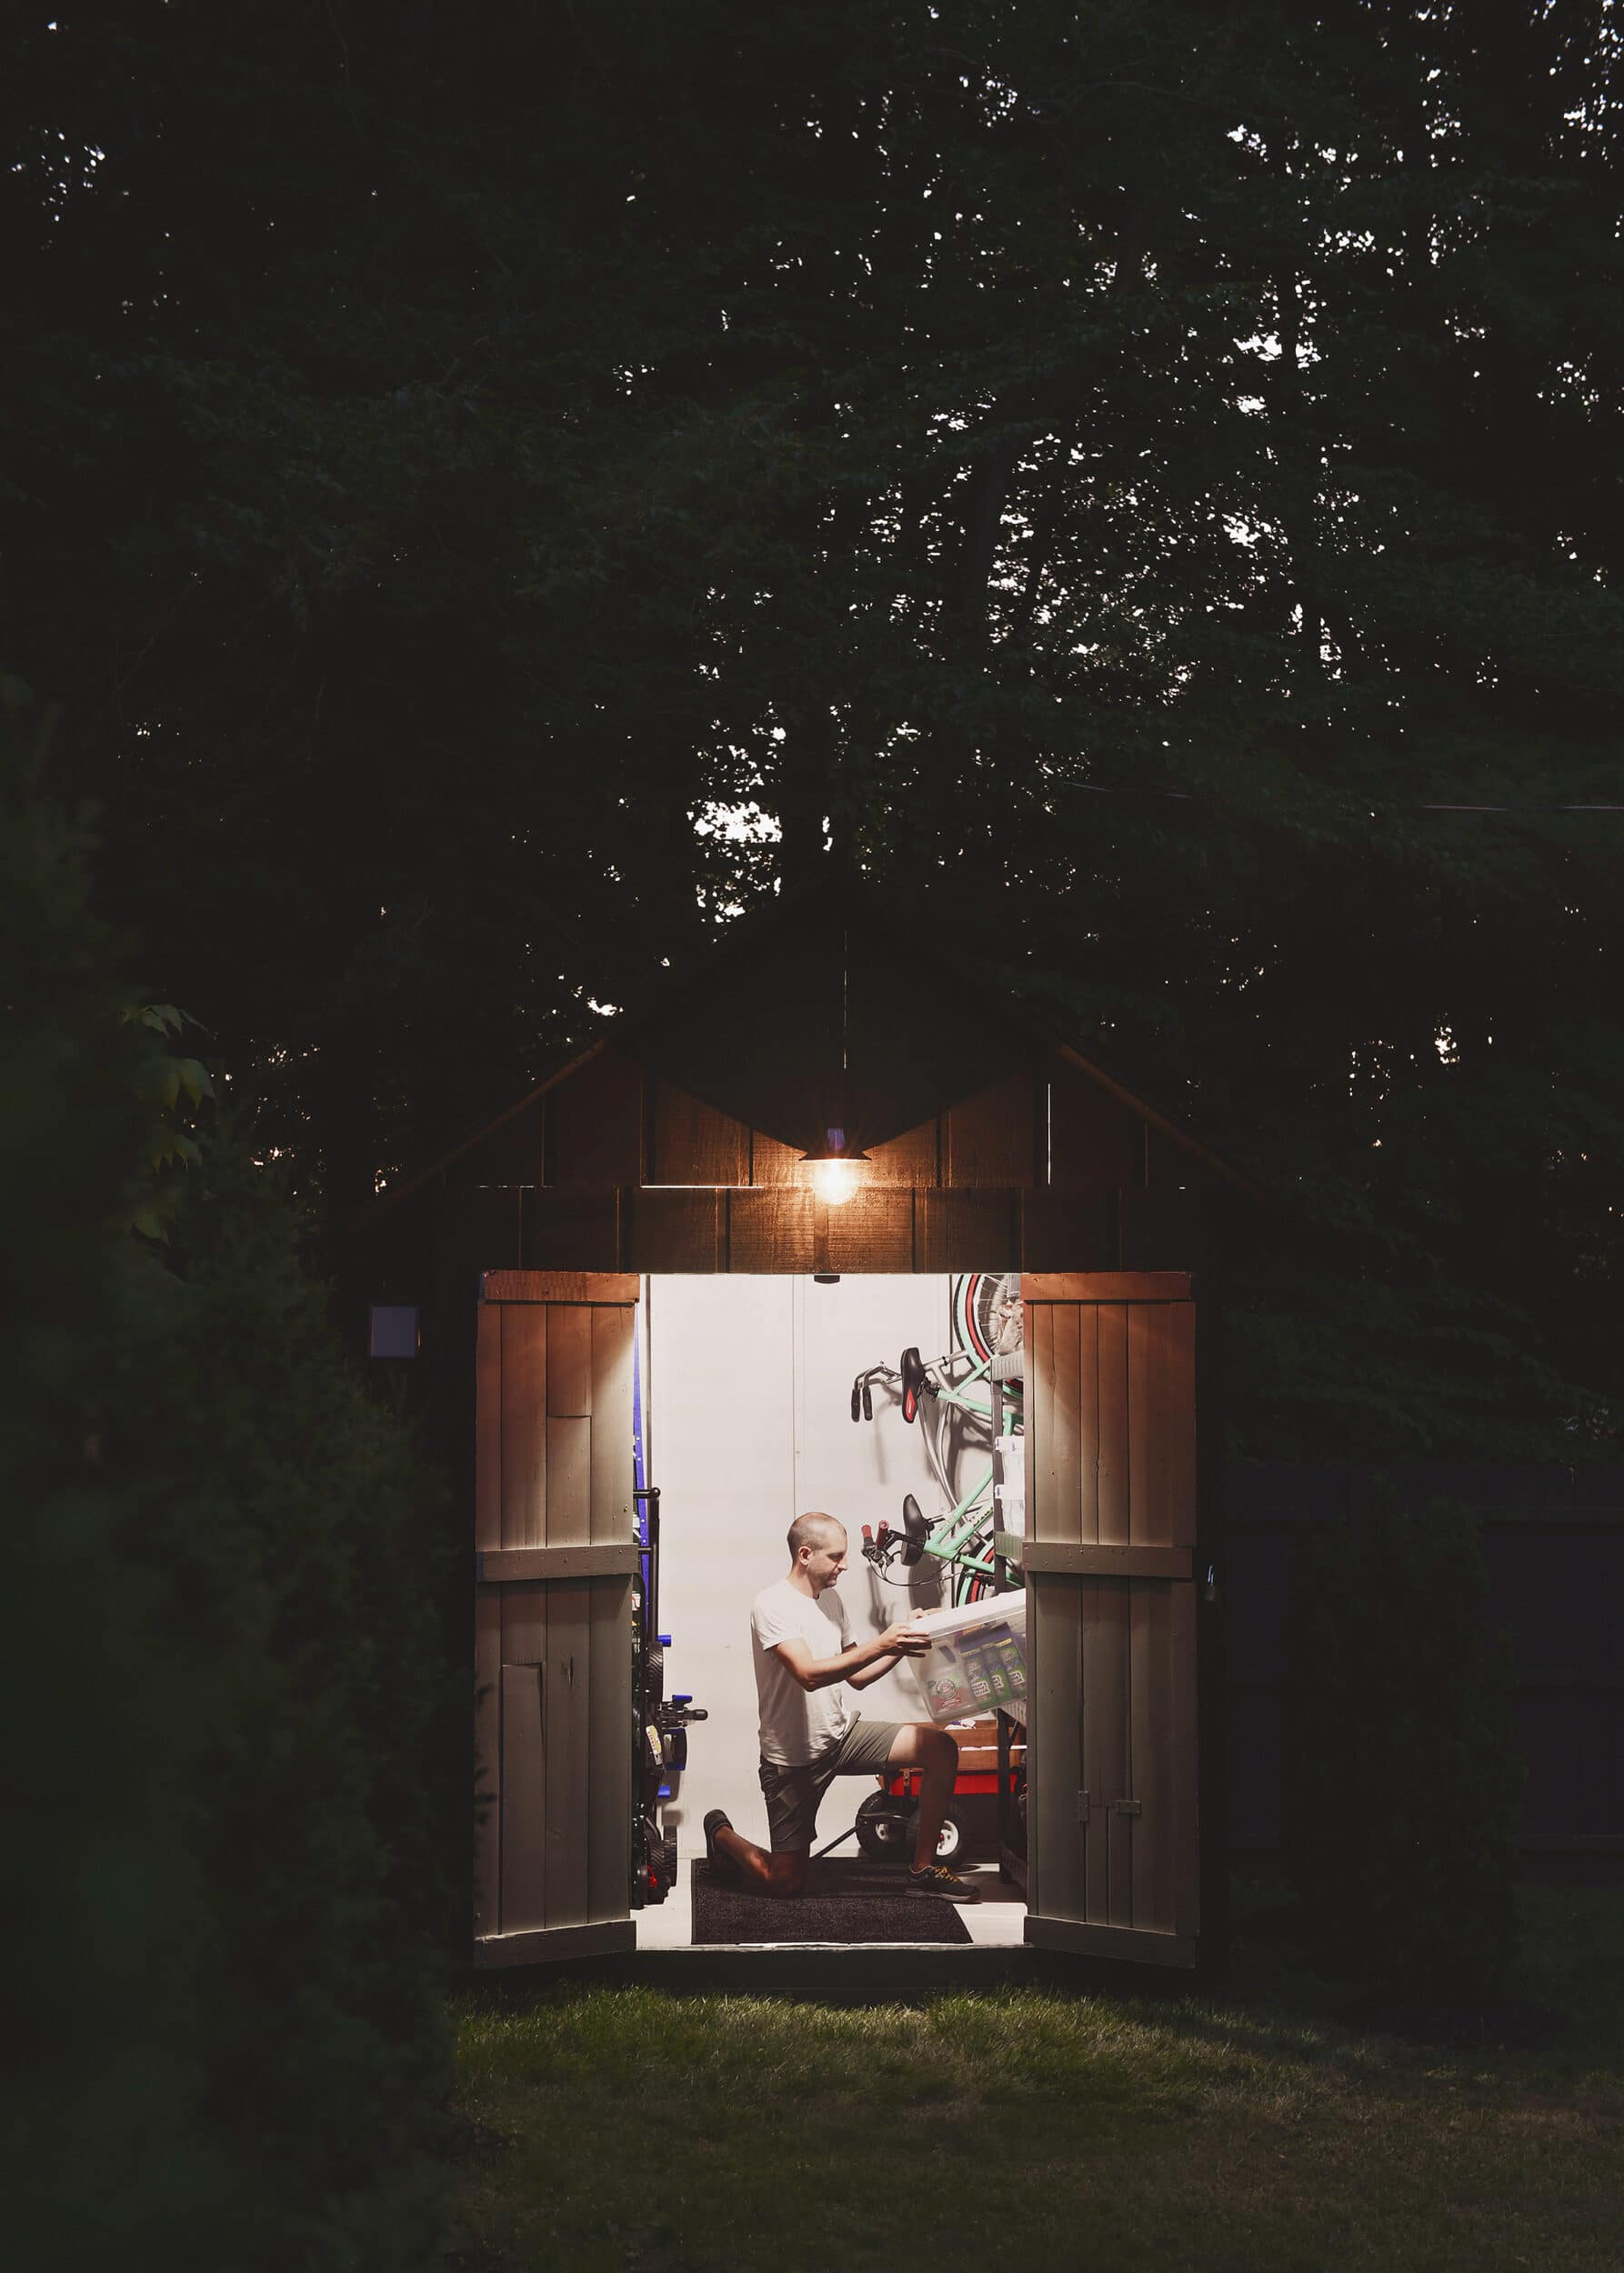 Scott working in the shed in the evening, lit by a solar light! | via Yellow Brick Home